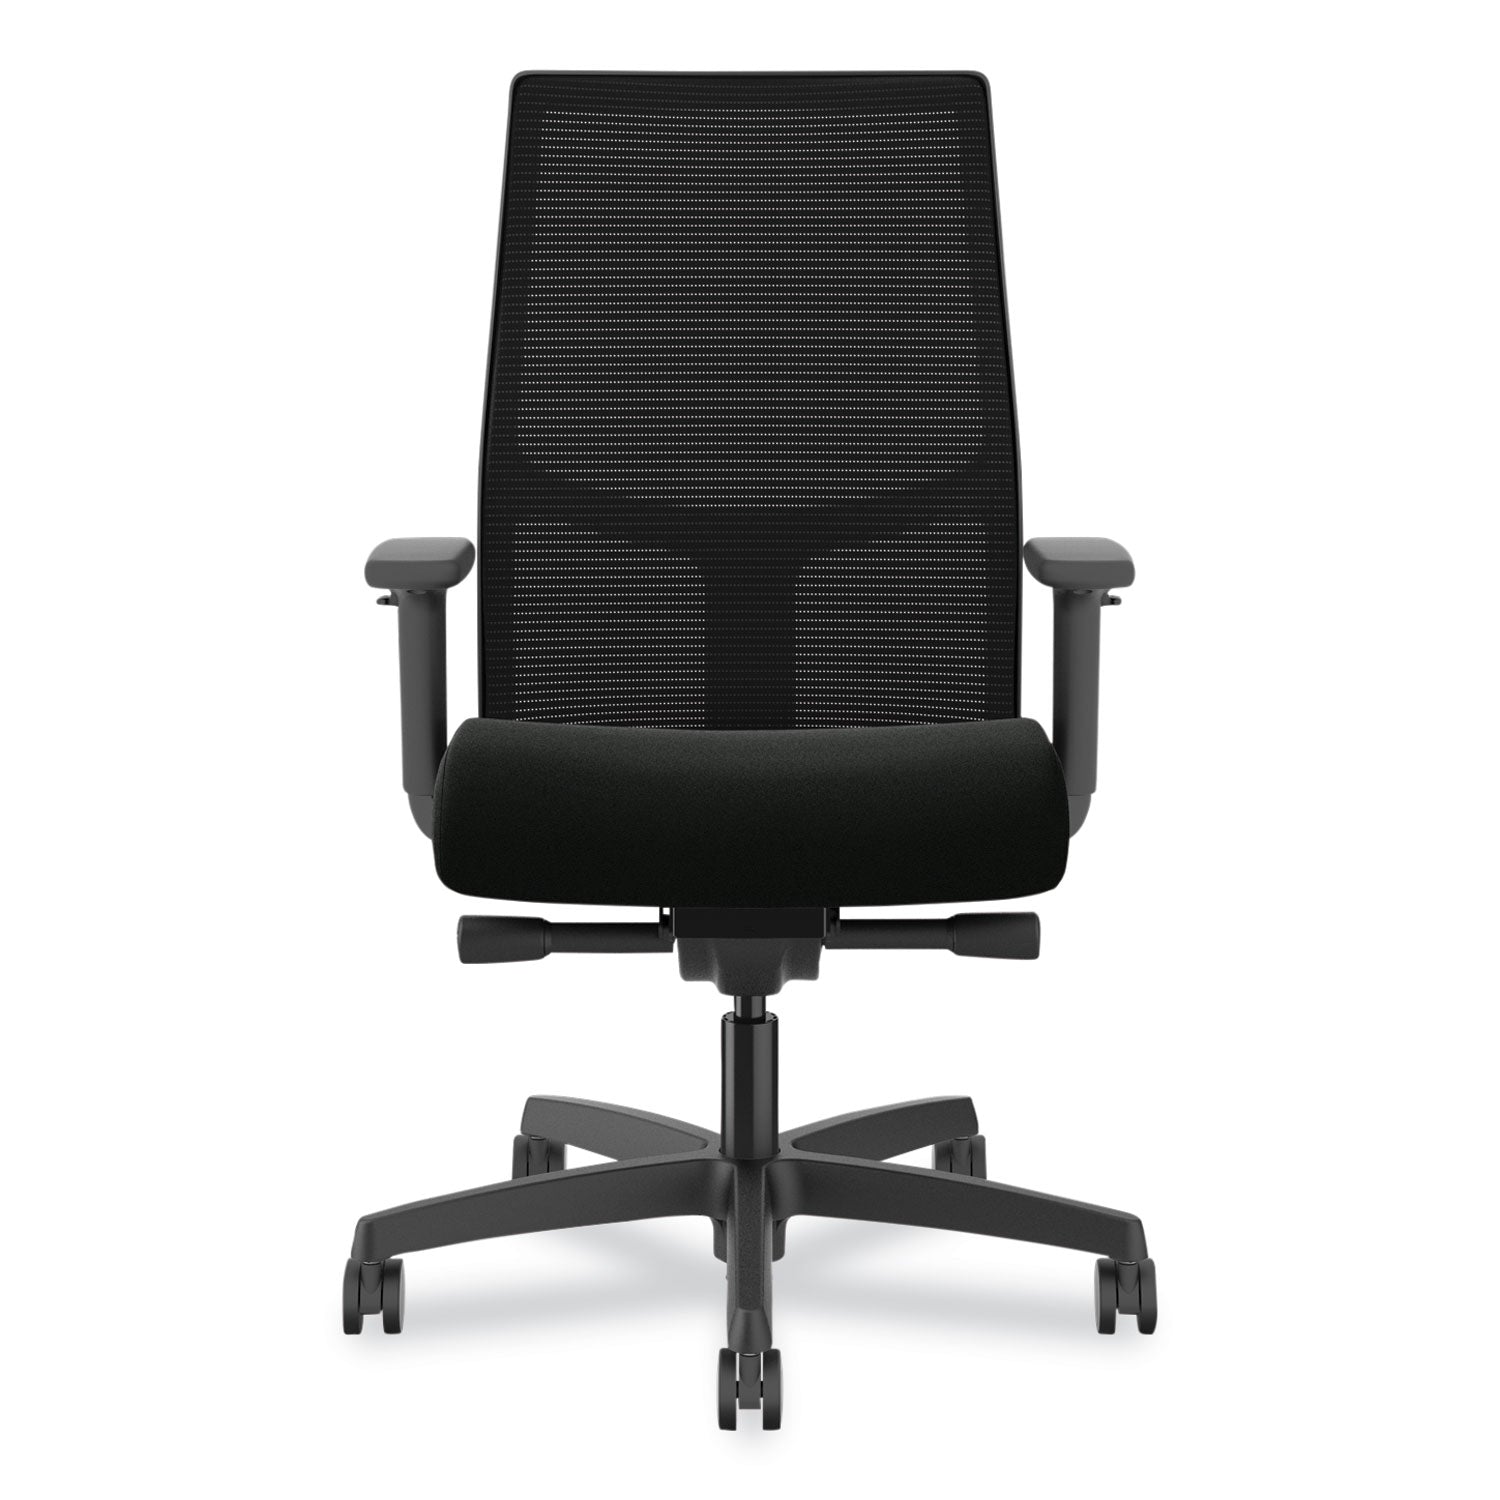 ignition-20-upholstered-mid-back-task-chair-17-to-215-seat-height-black-fabric-seat-back-ships-in-7-10-business-days_honi2u2ahur10tk - 2